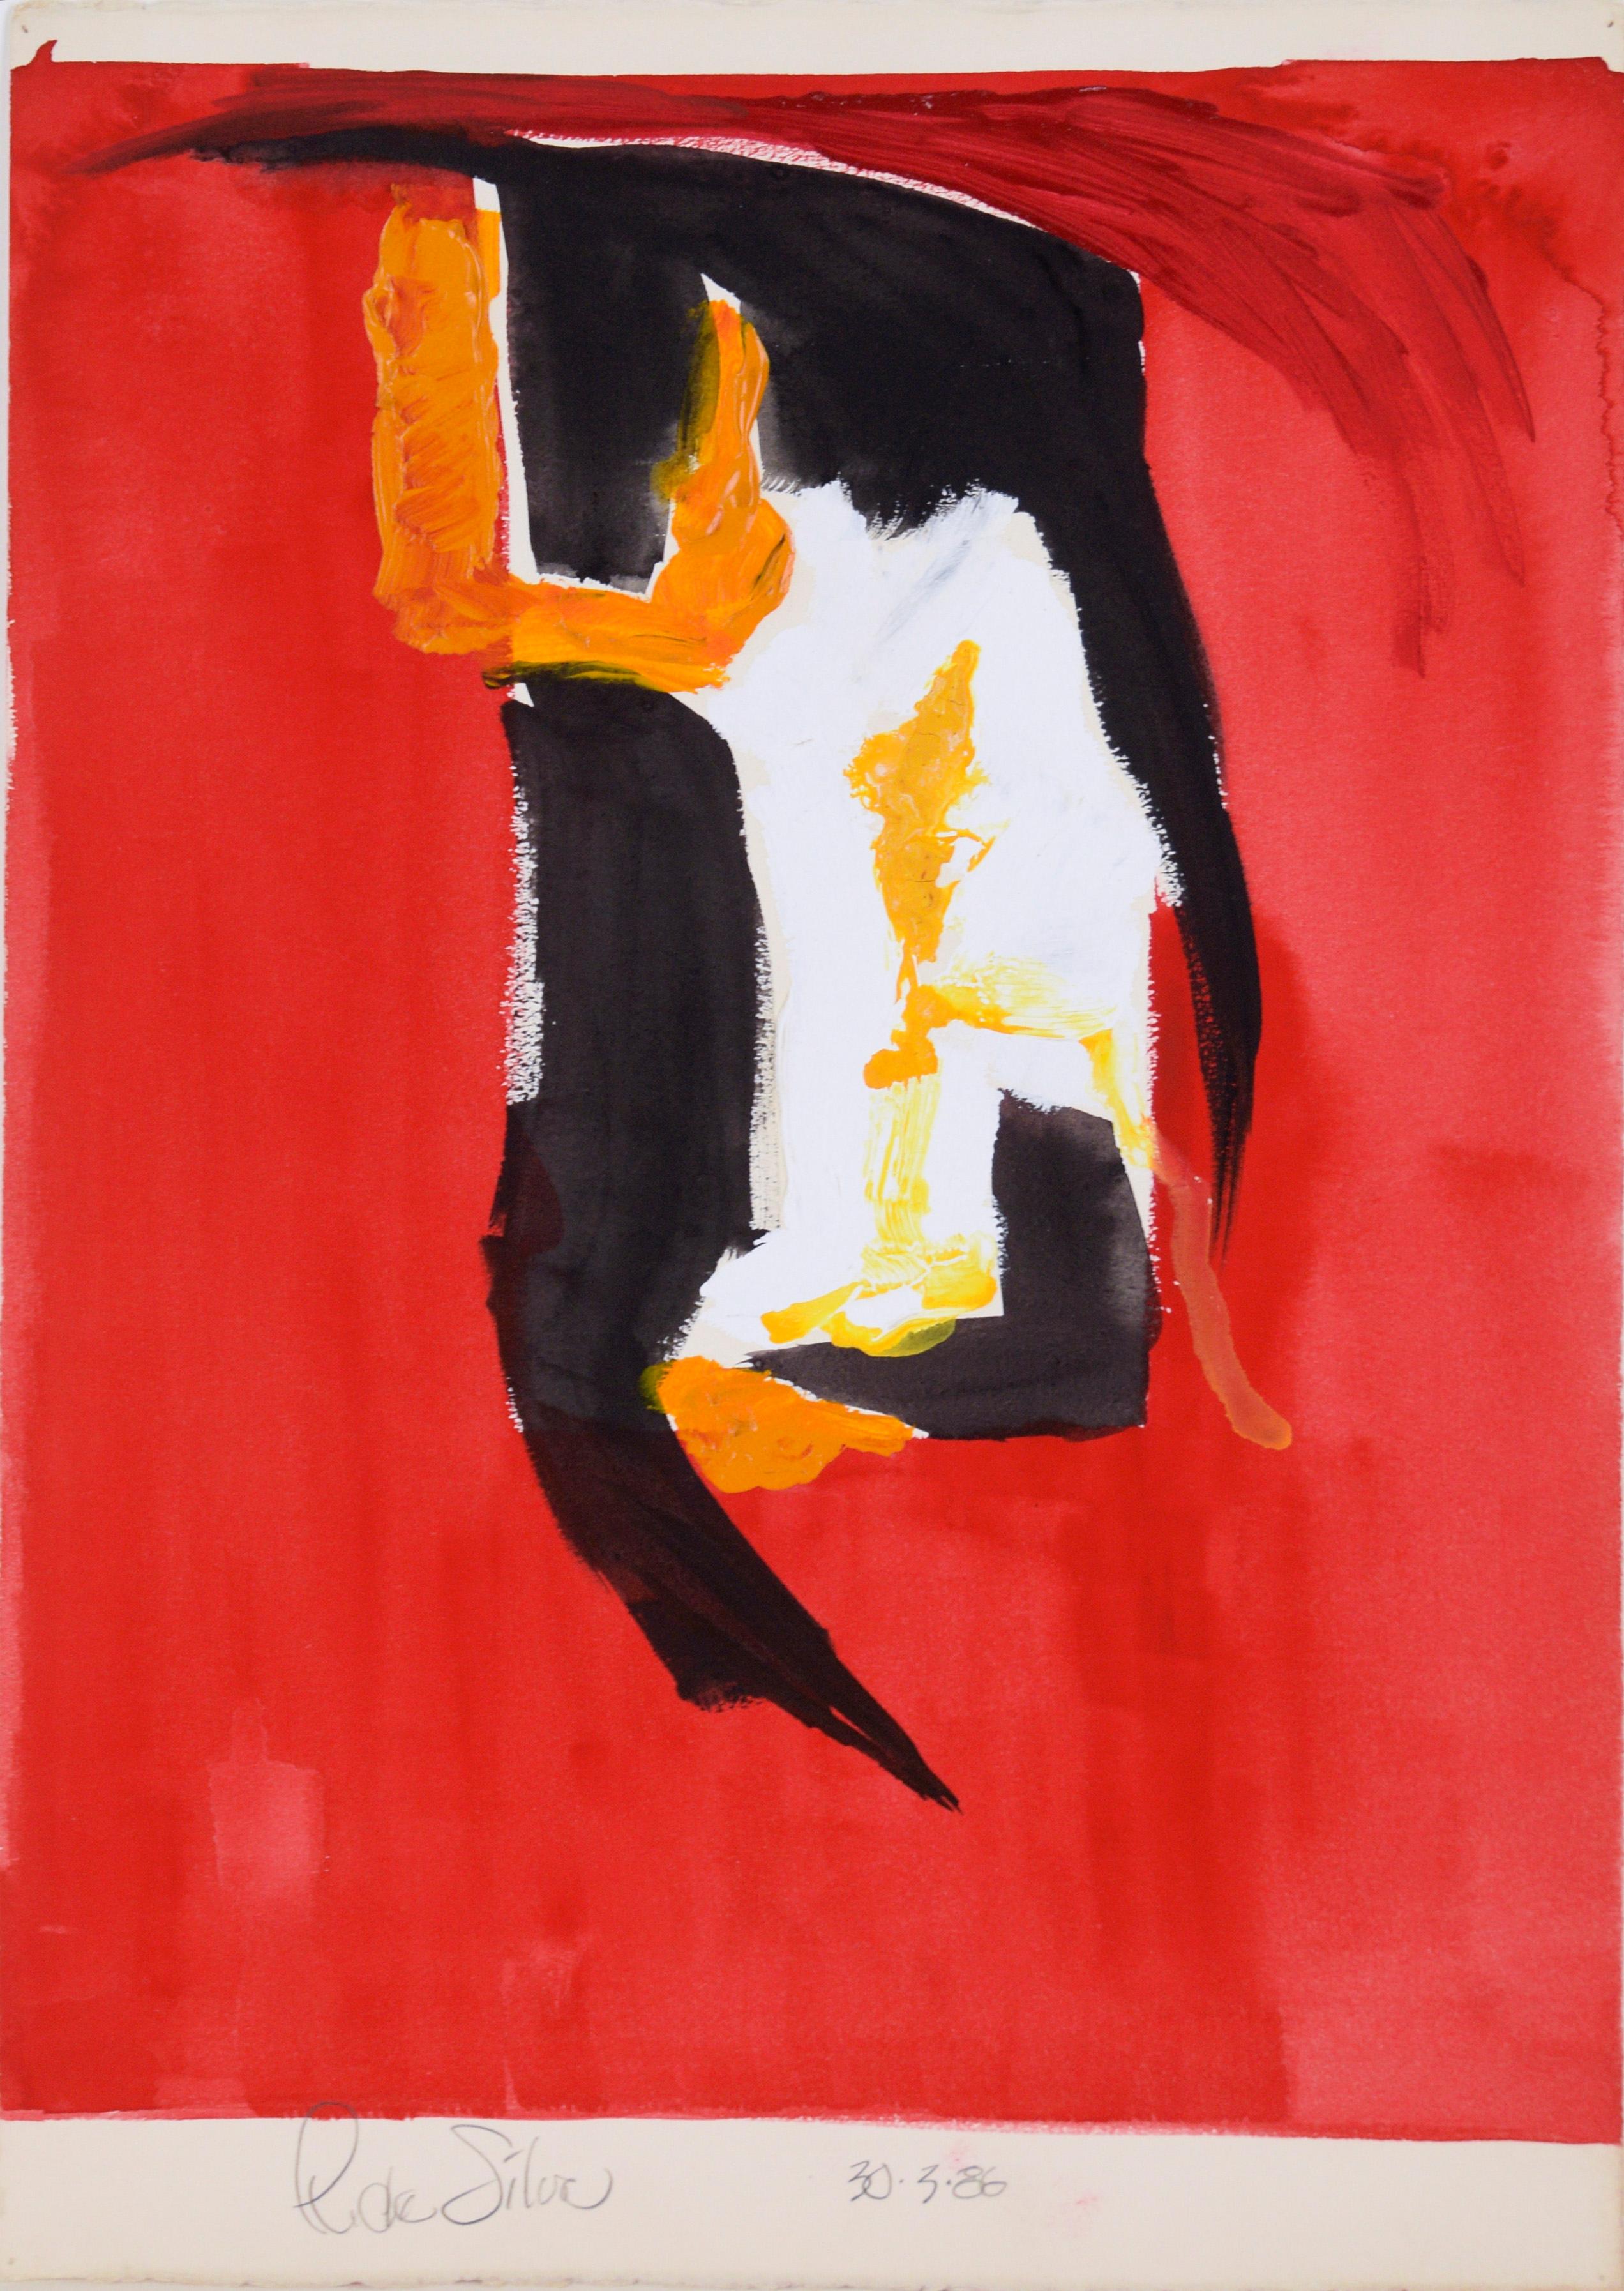 Ricardo de Silva Abstract Painting - Red with Black, White and Orange - Expressionist Composition in Acrylic on Paper